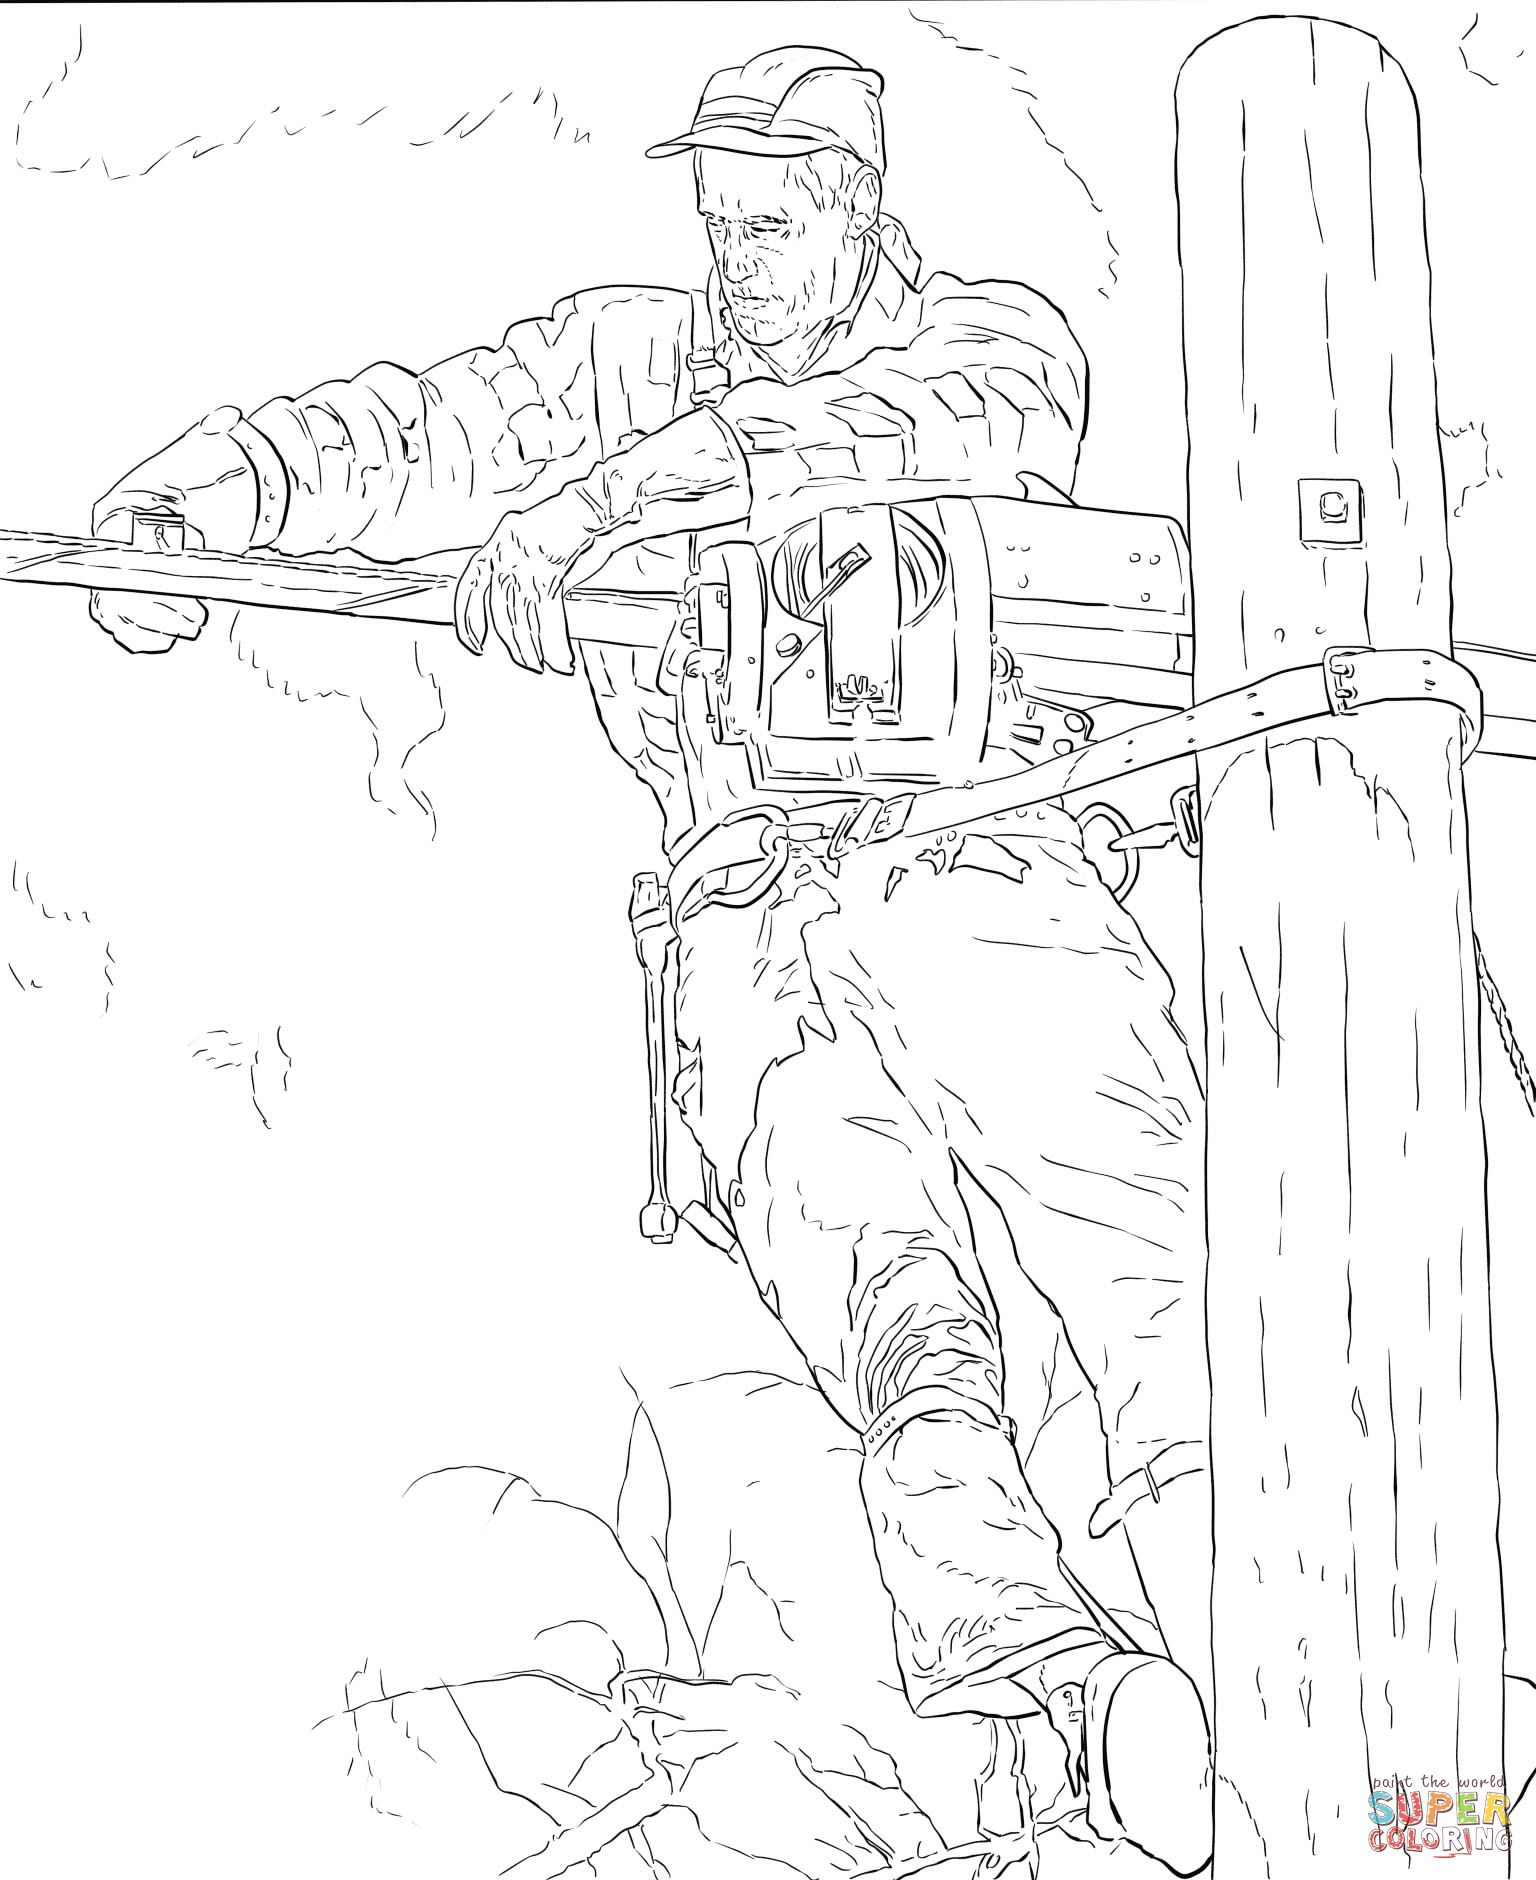 The lineman by norman rockwell coloring page free printable coloring pages coloring pages free printable coloring pages free printable coloring